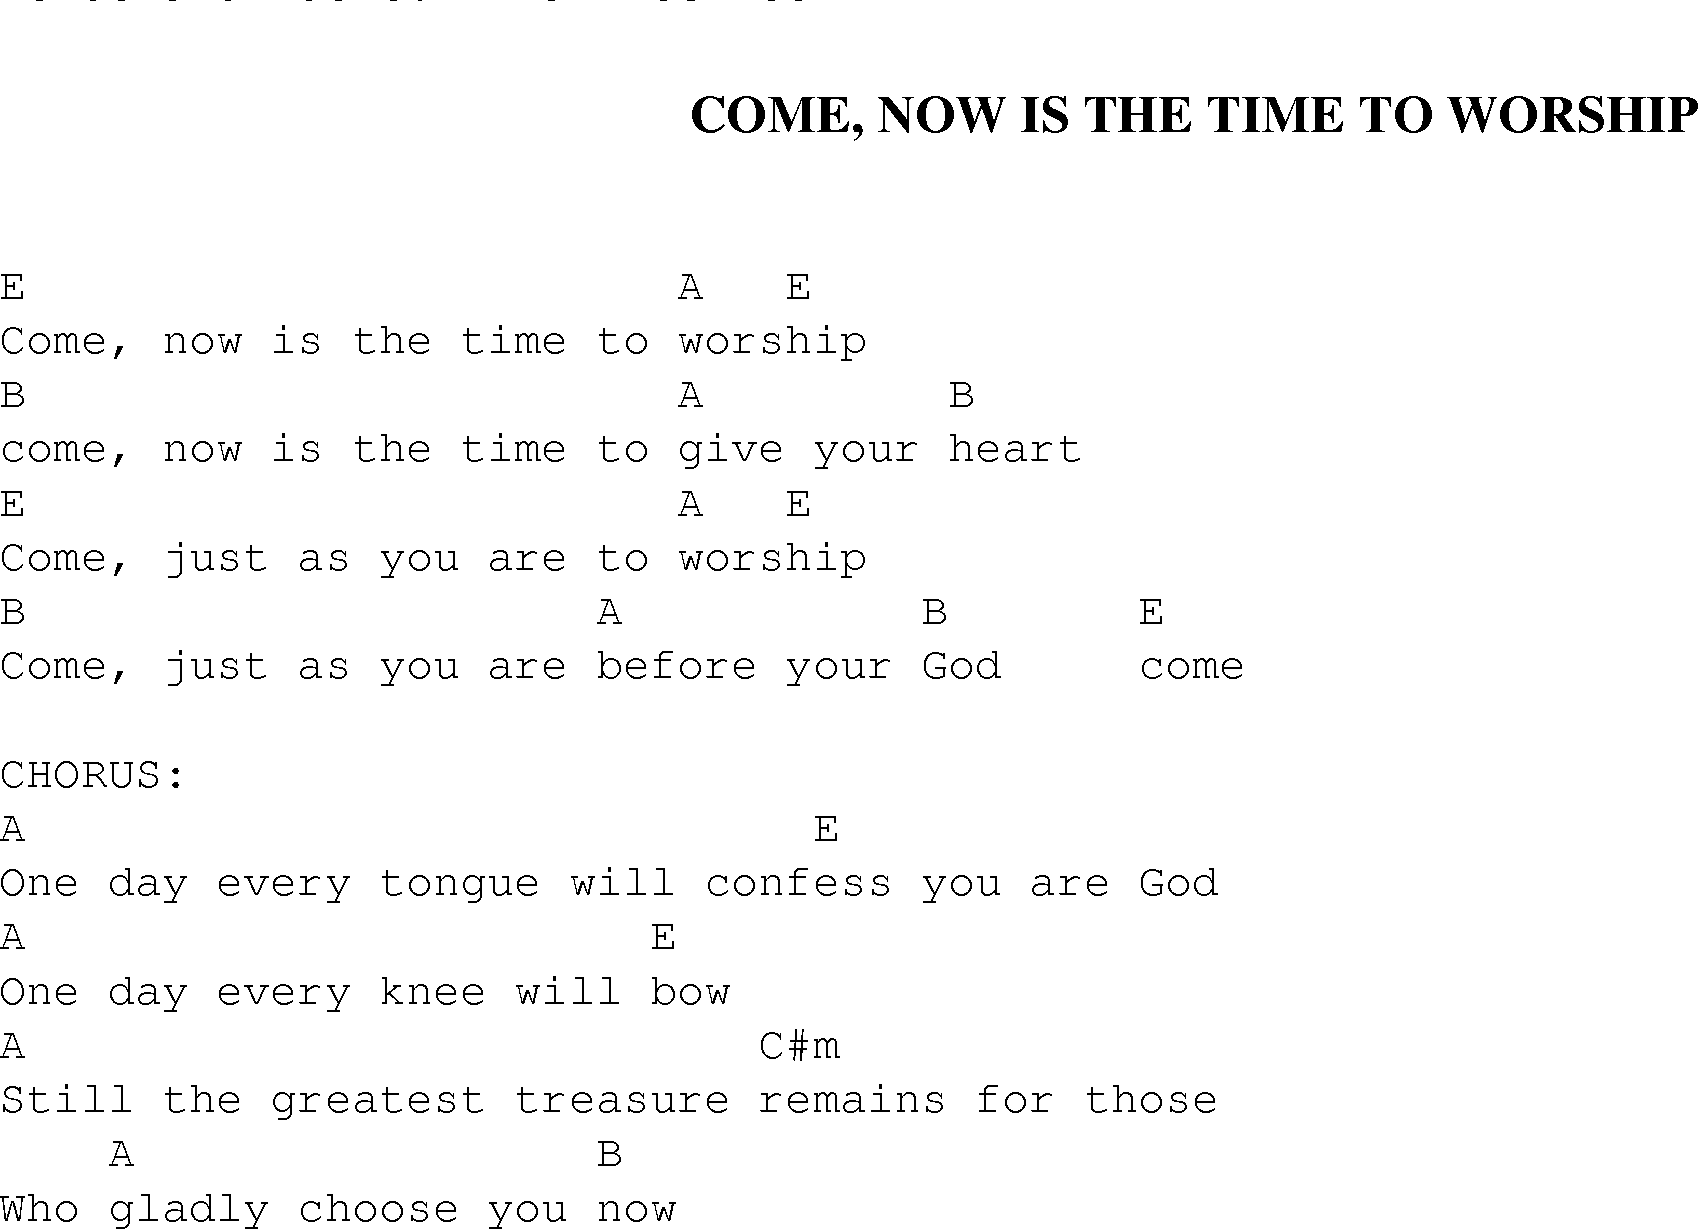 Gospel Song: come_now_is_the_time_to_worship, lyrics and chords.